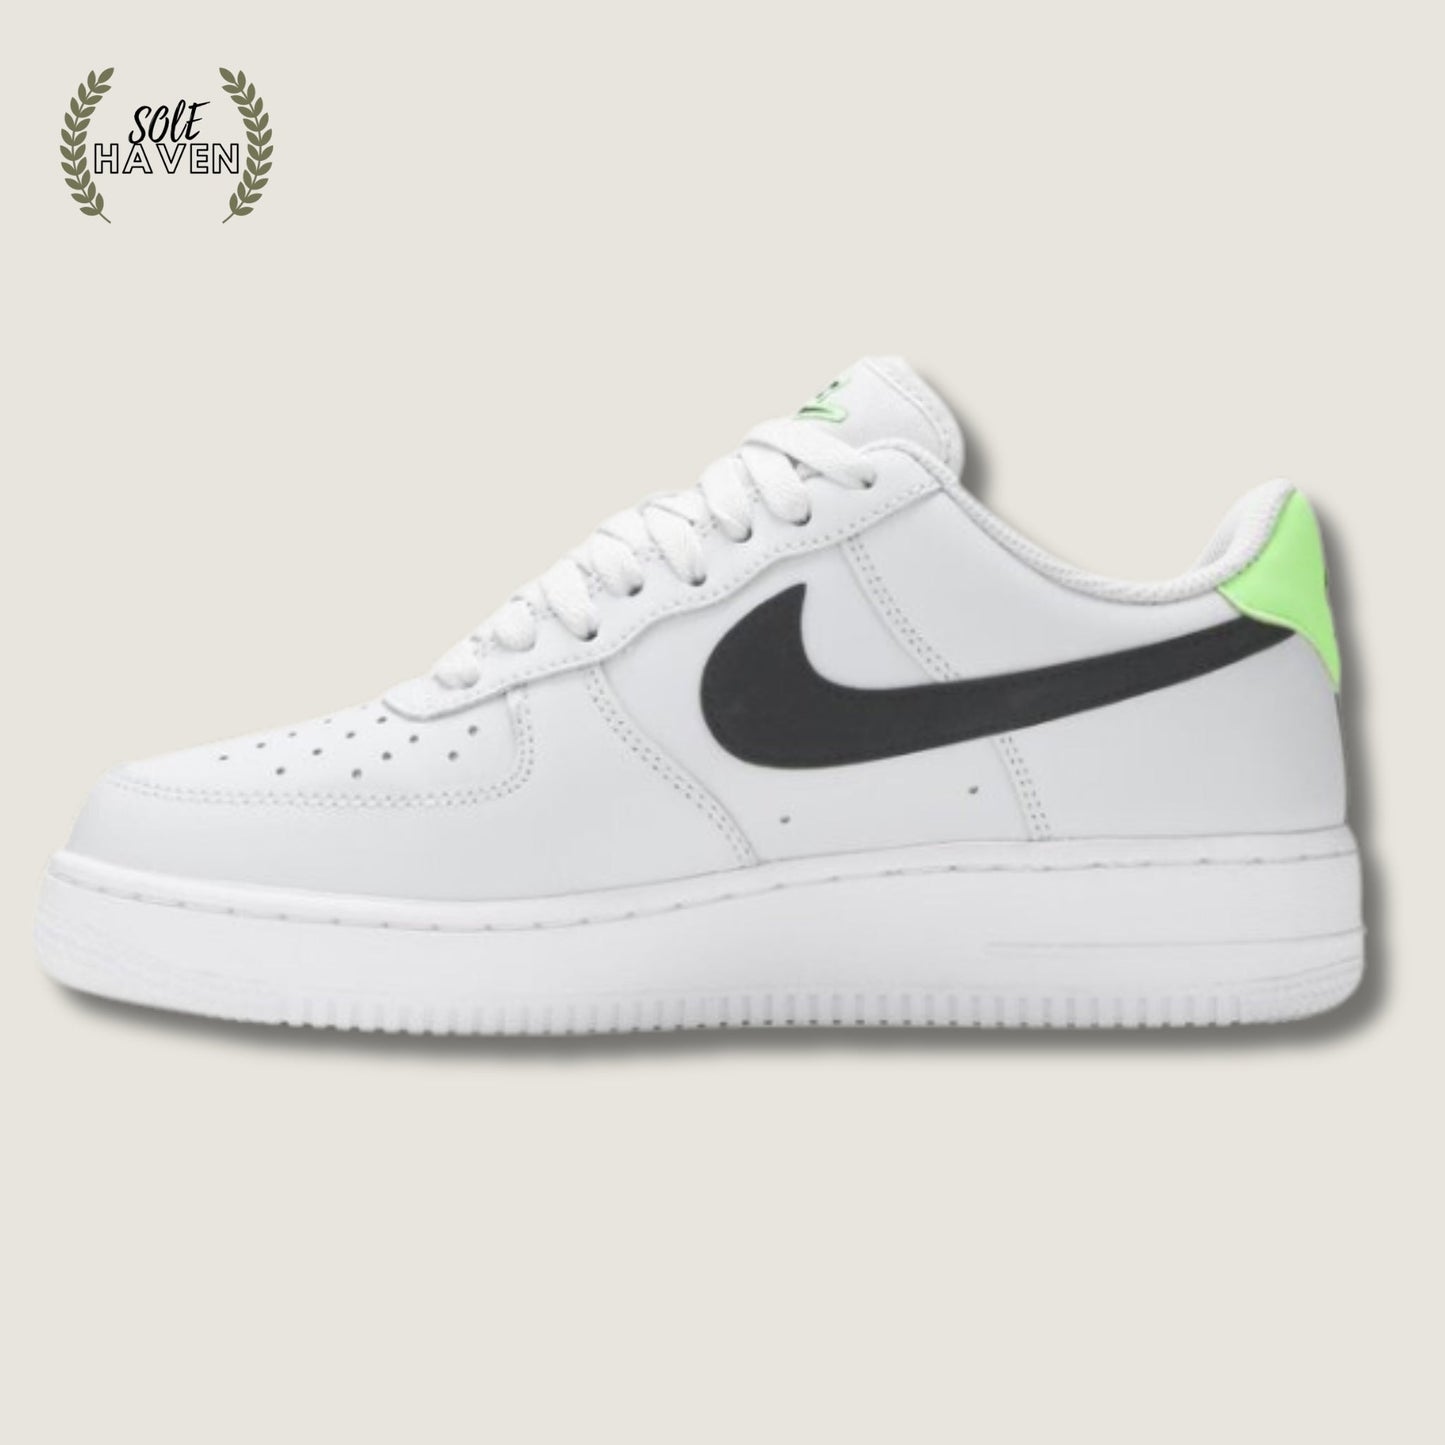 Air Force 1 '07 Low 'Worldwide Pack - Platinum Green Strike' - Sole HavenShoesNike